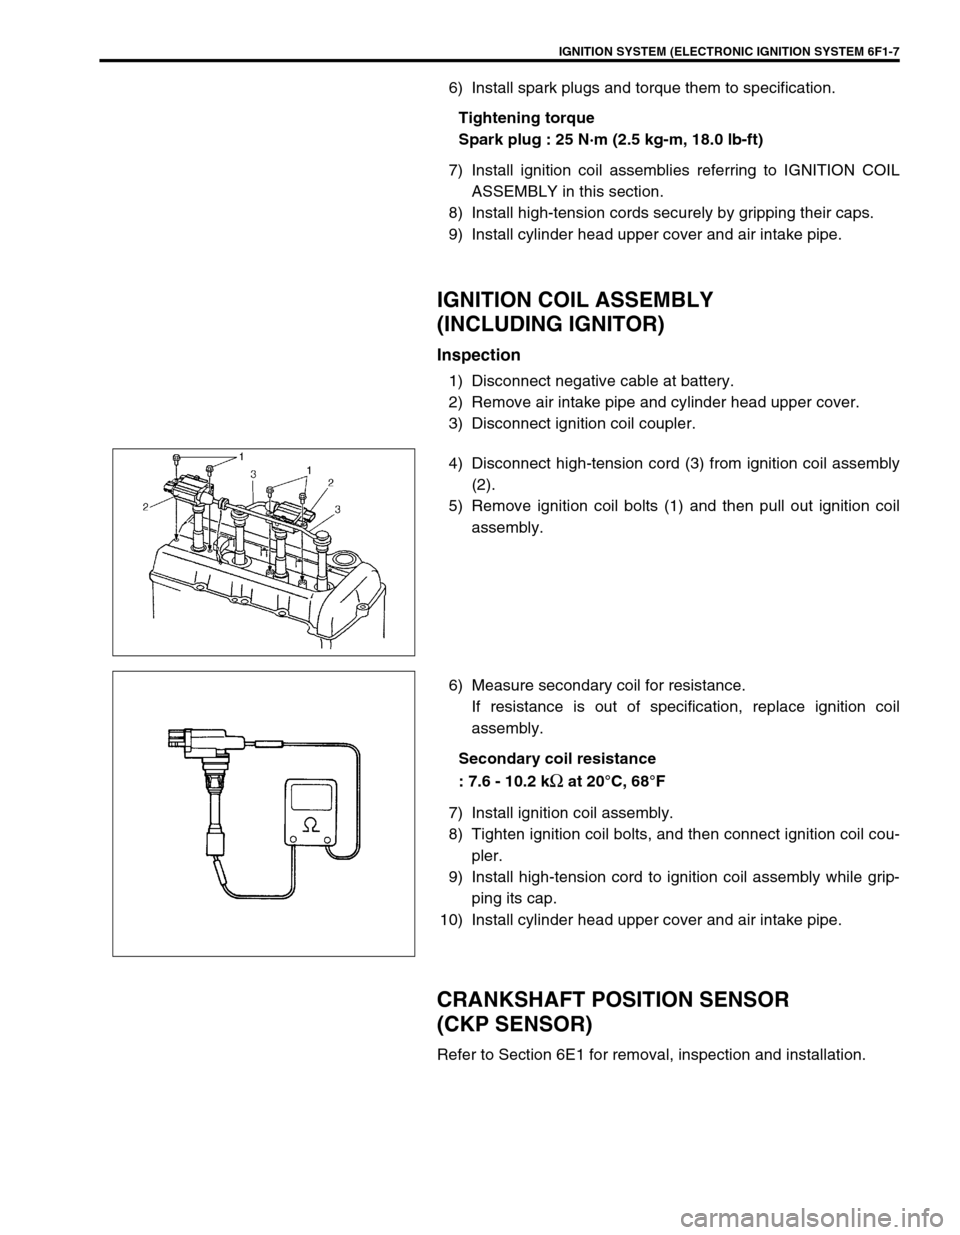 SUZUKI SWIFT 2000 1.G RG413 Service Manual PDF IGNITION SYSTEM (ELECTRONIC IGNITION SYSTEM 6F1-7
6) Install spark plugs and torque them to specification.
Tightening torque
Spark plug : 25 N·m (2.5 kg-m, 18.0 lb-ft)
7) Install ignition coil assemb